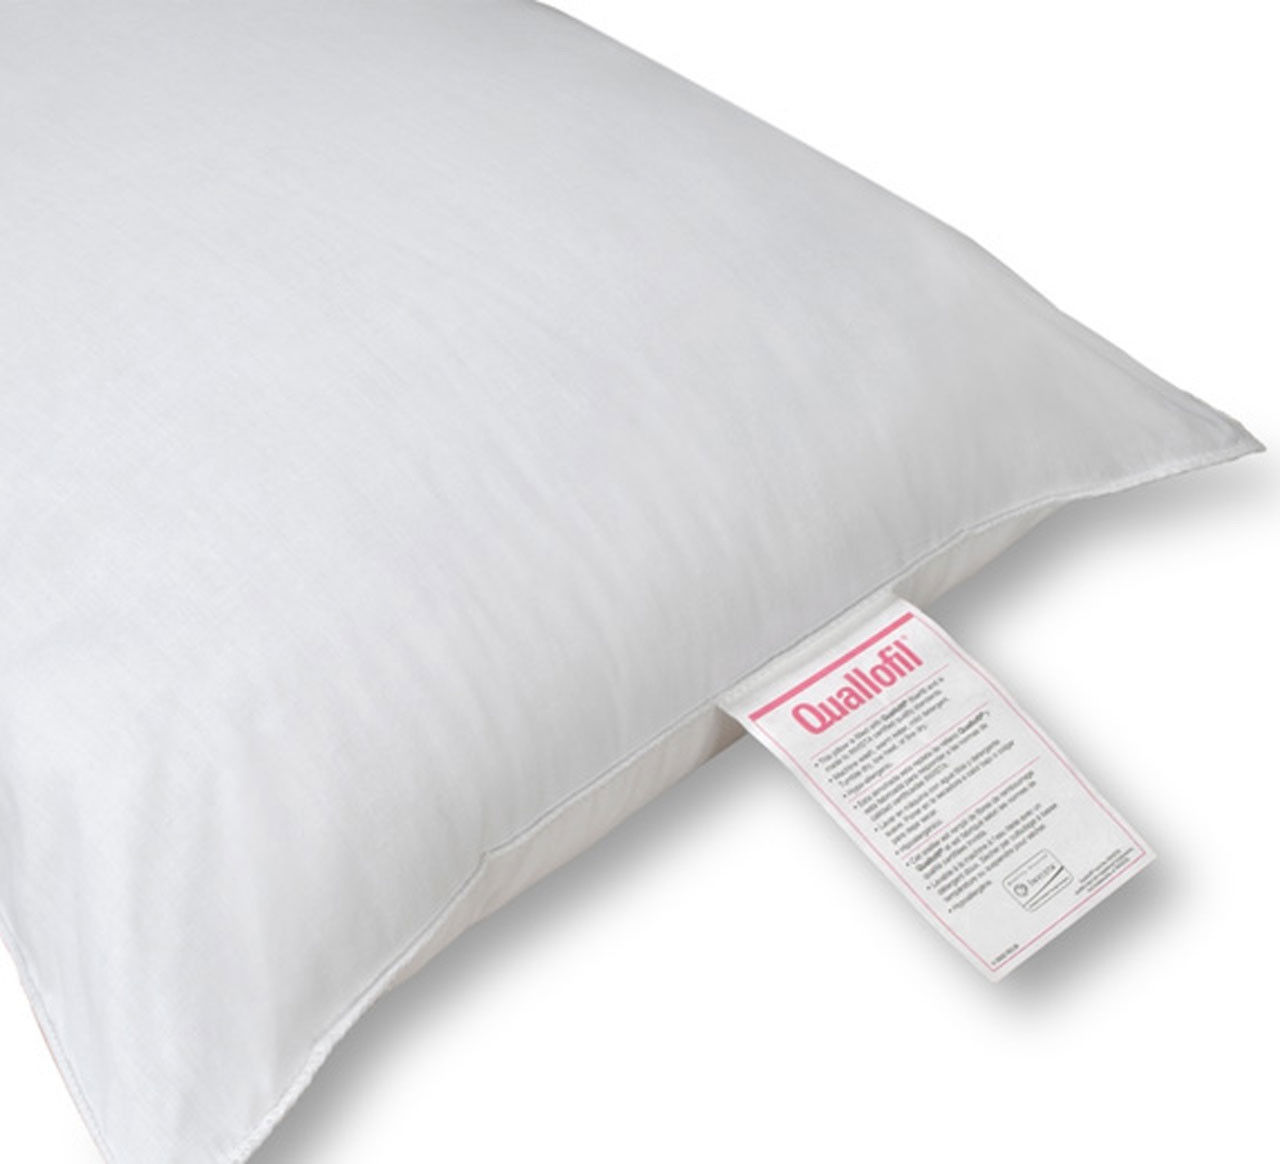 What is the density support level of the Quallofil Pillow?